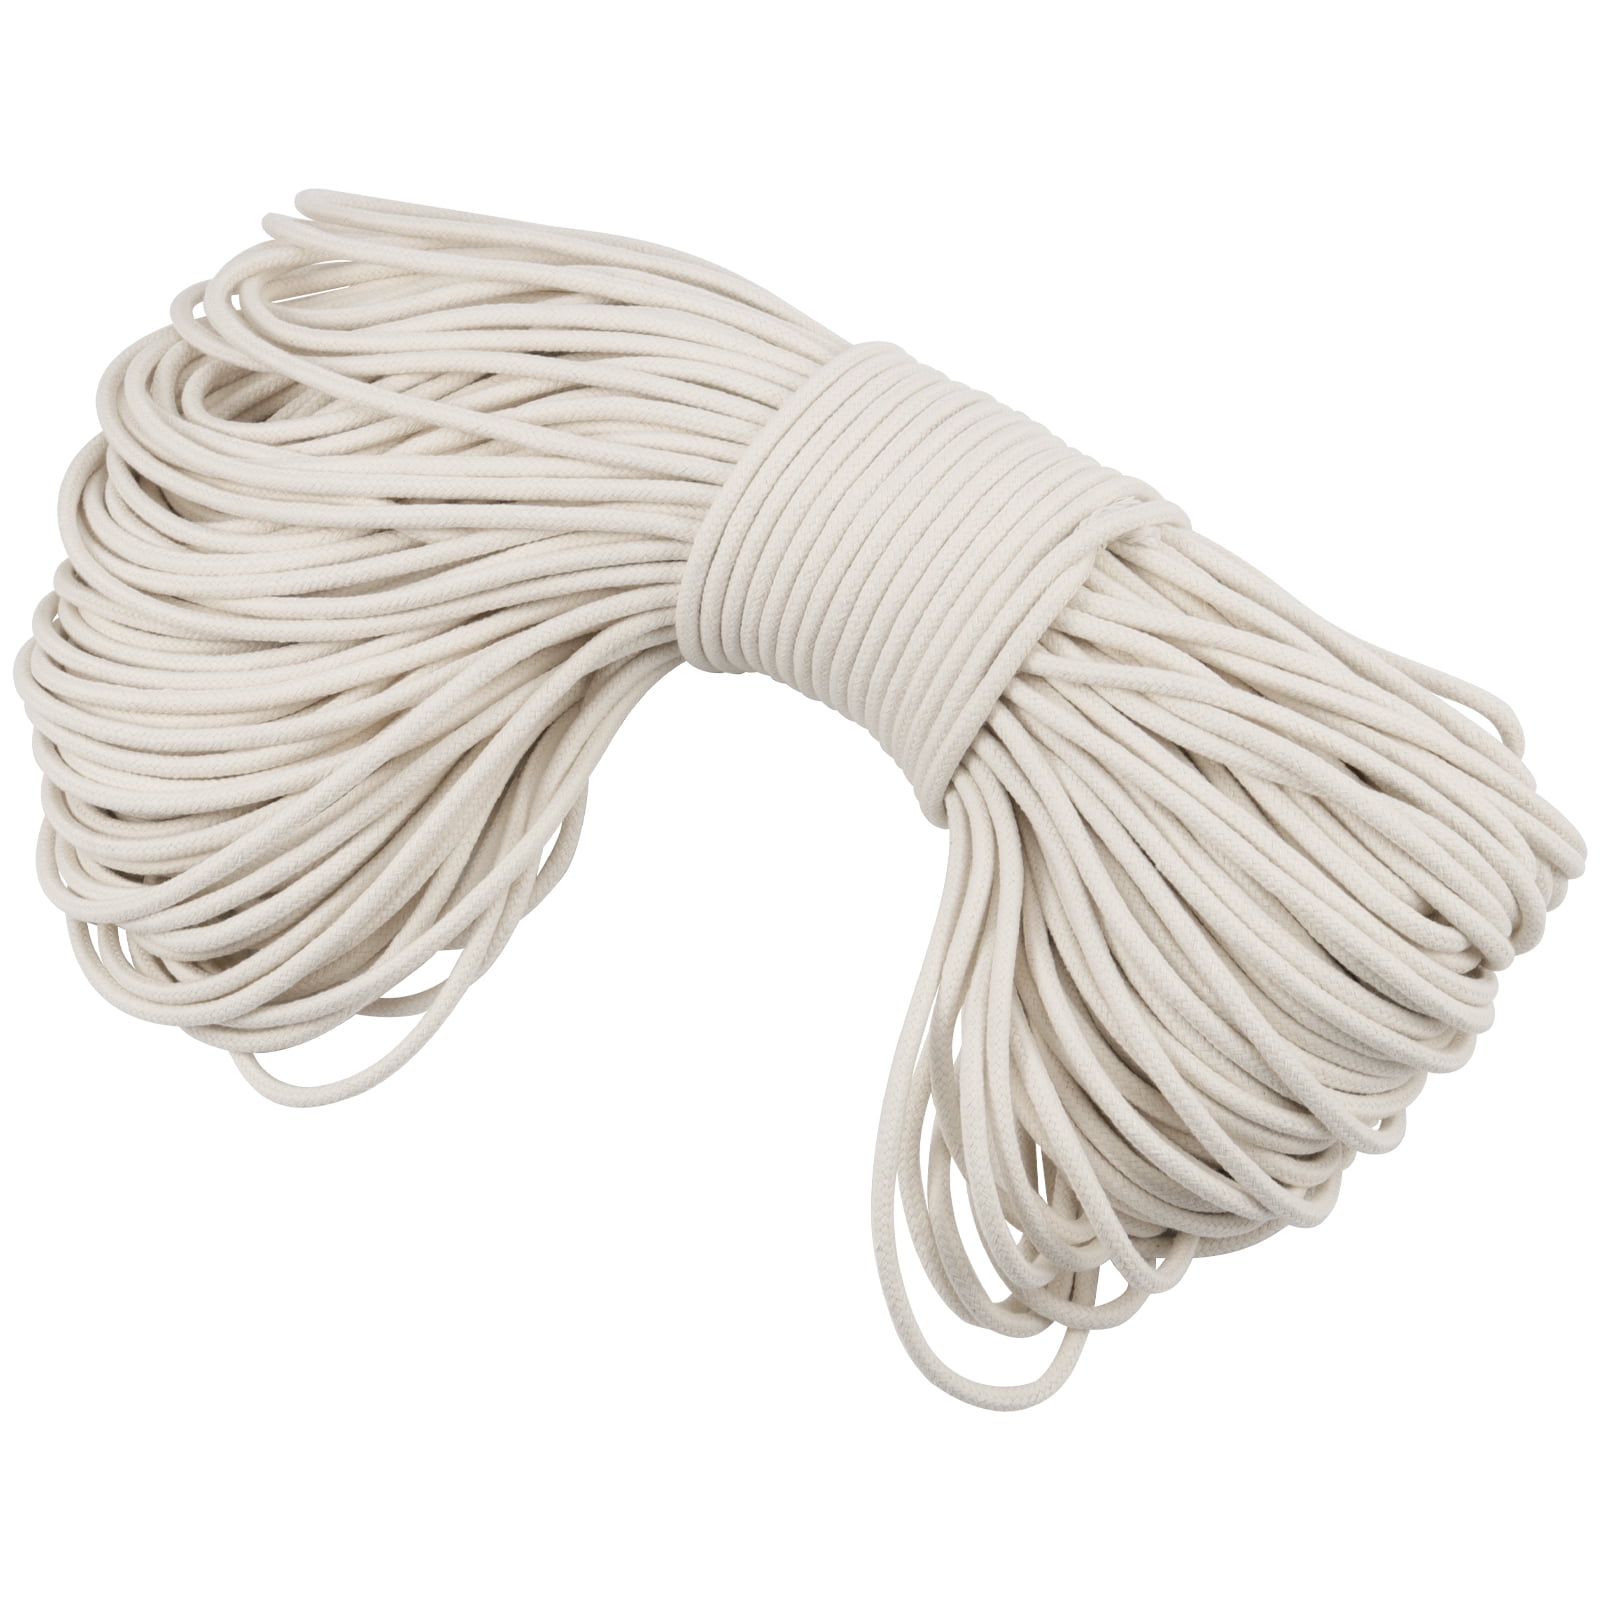 KEILEOHO 1/4 Inch Natural Cotton Rope, 328 FT Length White Clothesline Cord  Craft Knitting Thread String Wall Hanging Rope for Garden Plant DIY